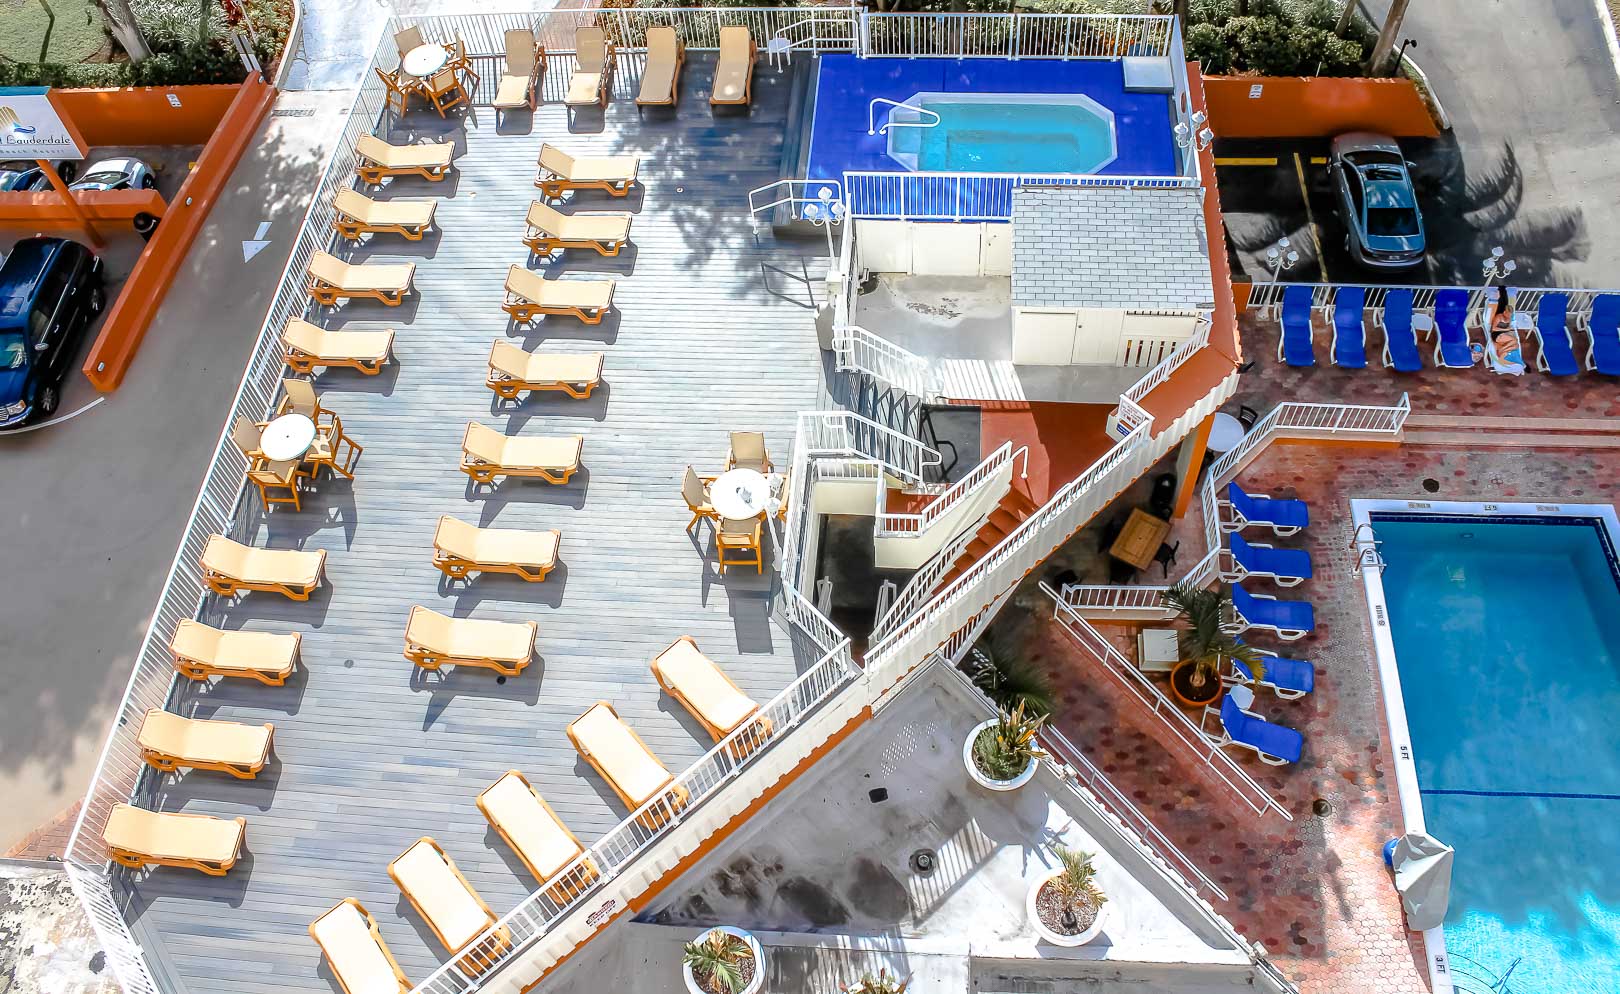 A view of the outside deck and the pool at VRI's Ft. Lauderdale Beach Resort in Florida.